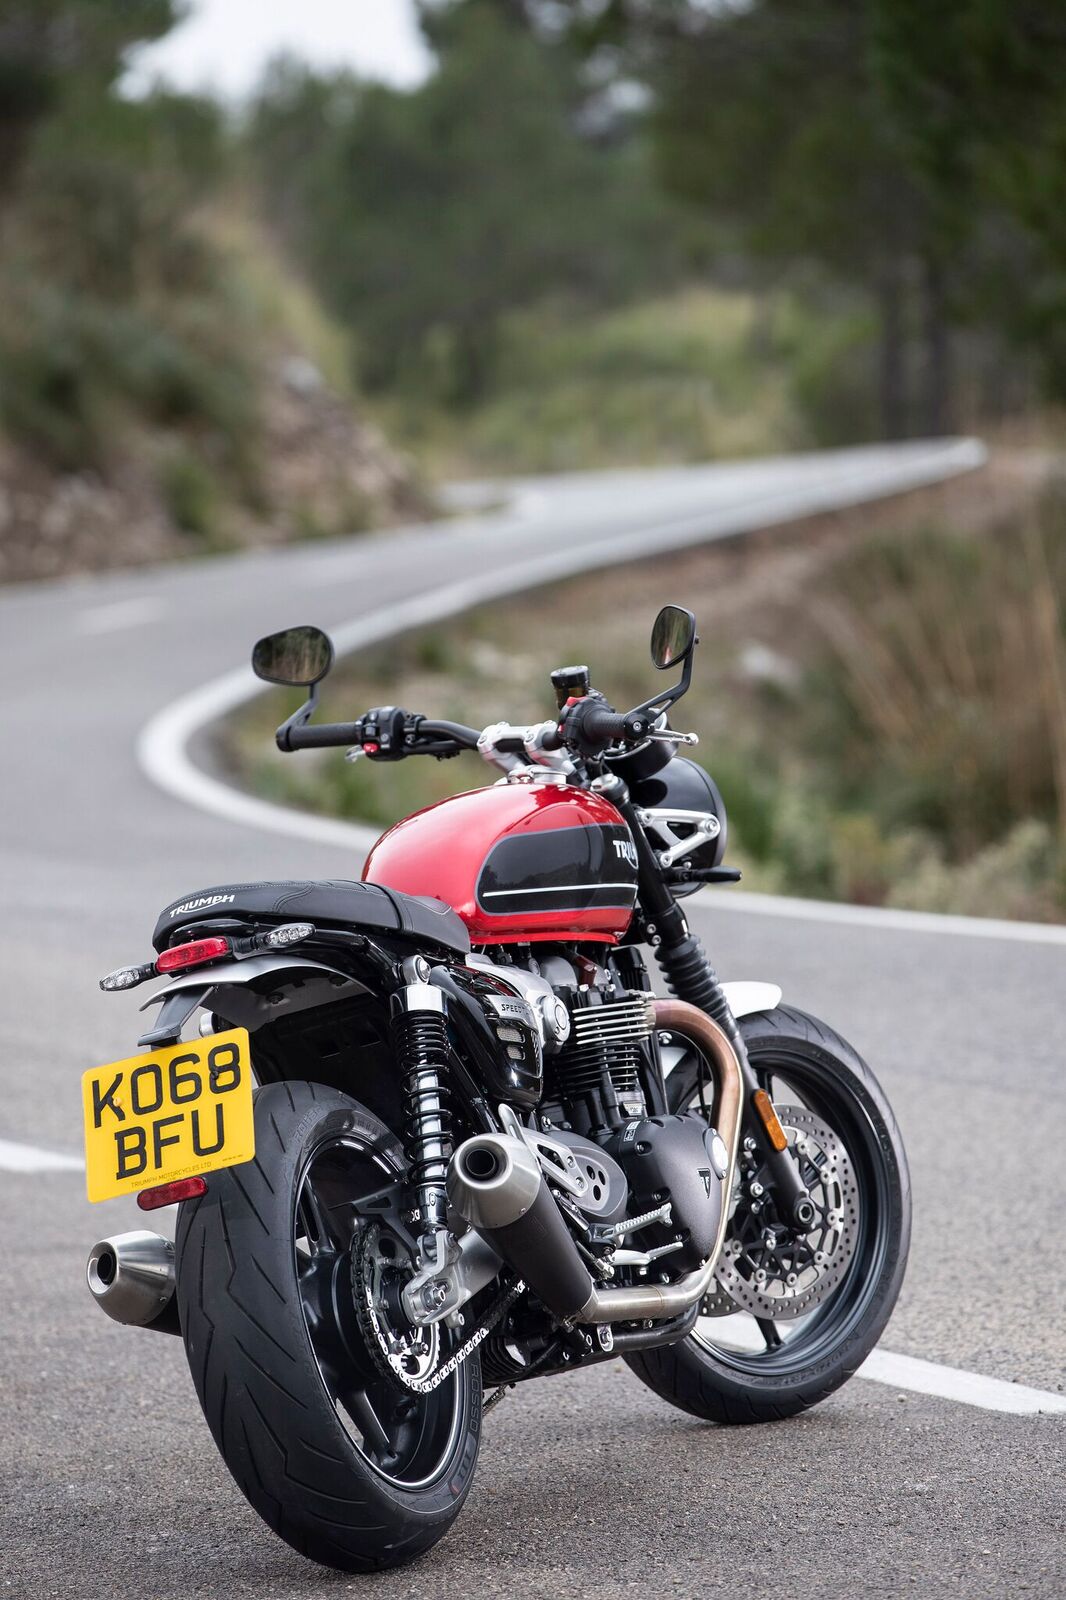 2019 Triumph Speed Twin Review